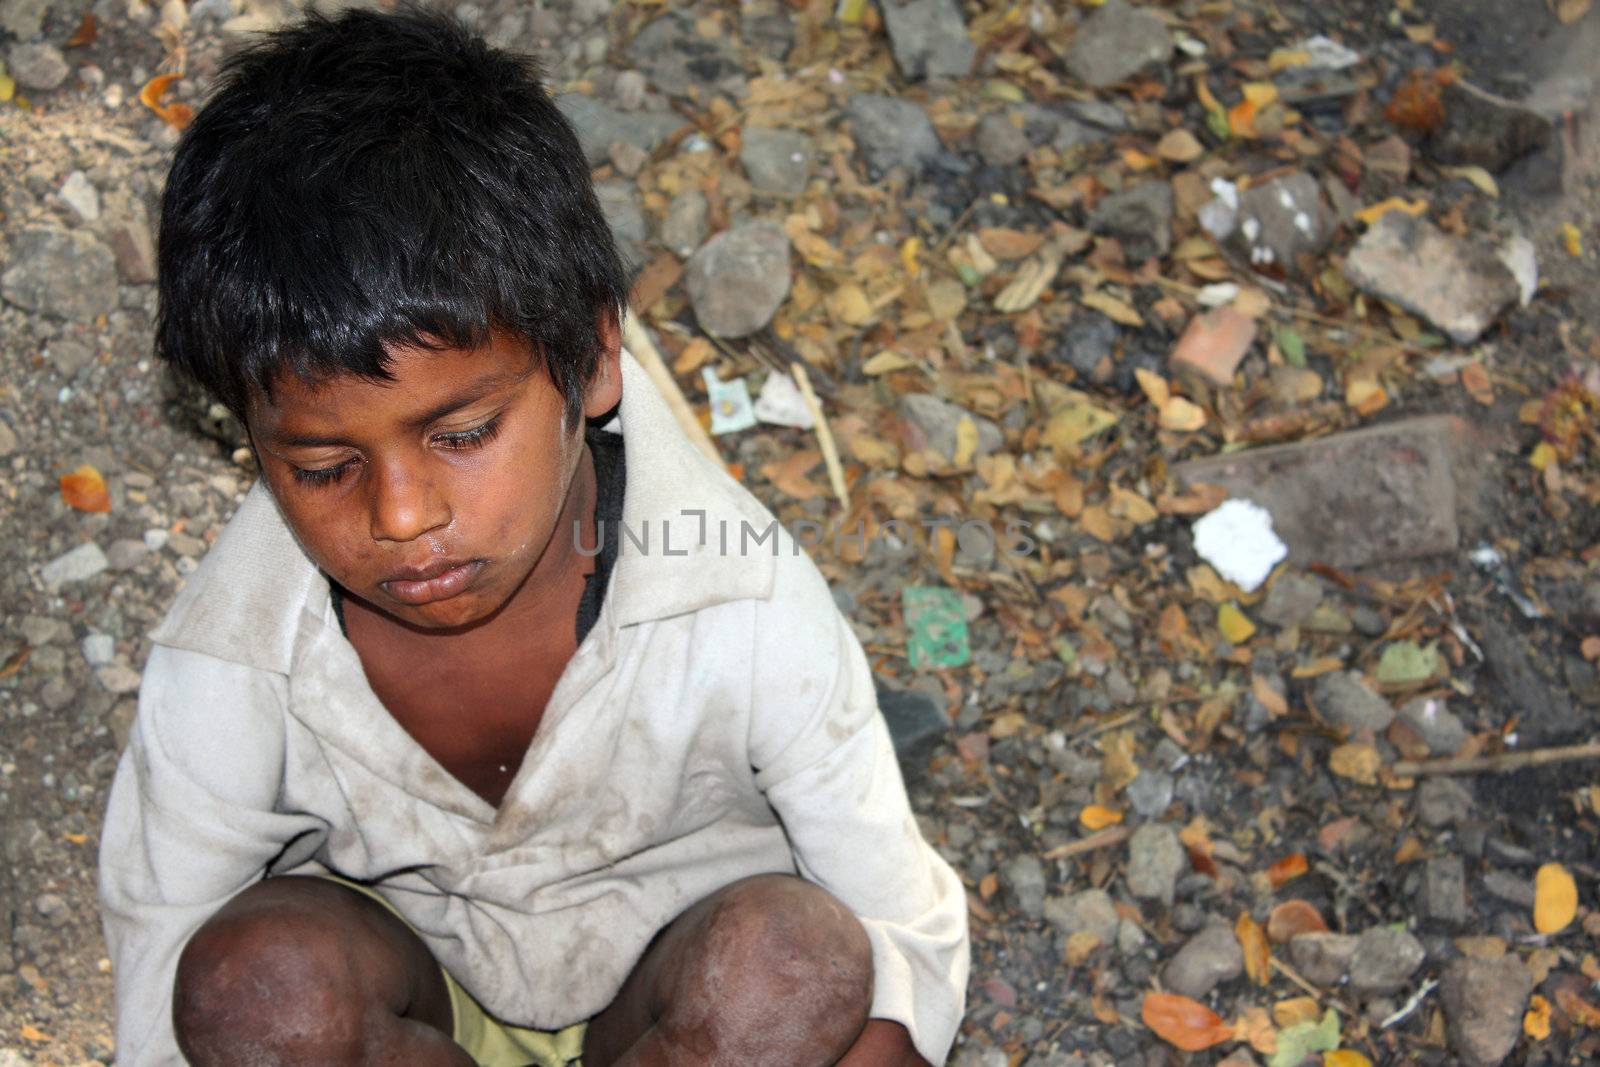 A sick beggar boy sitting hopelessly in his poverty conditions in India.